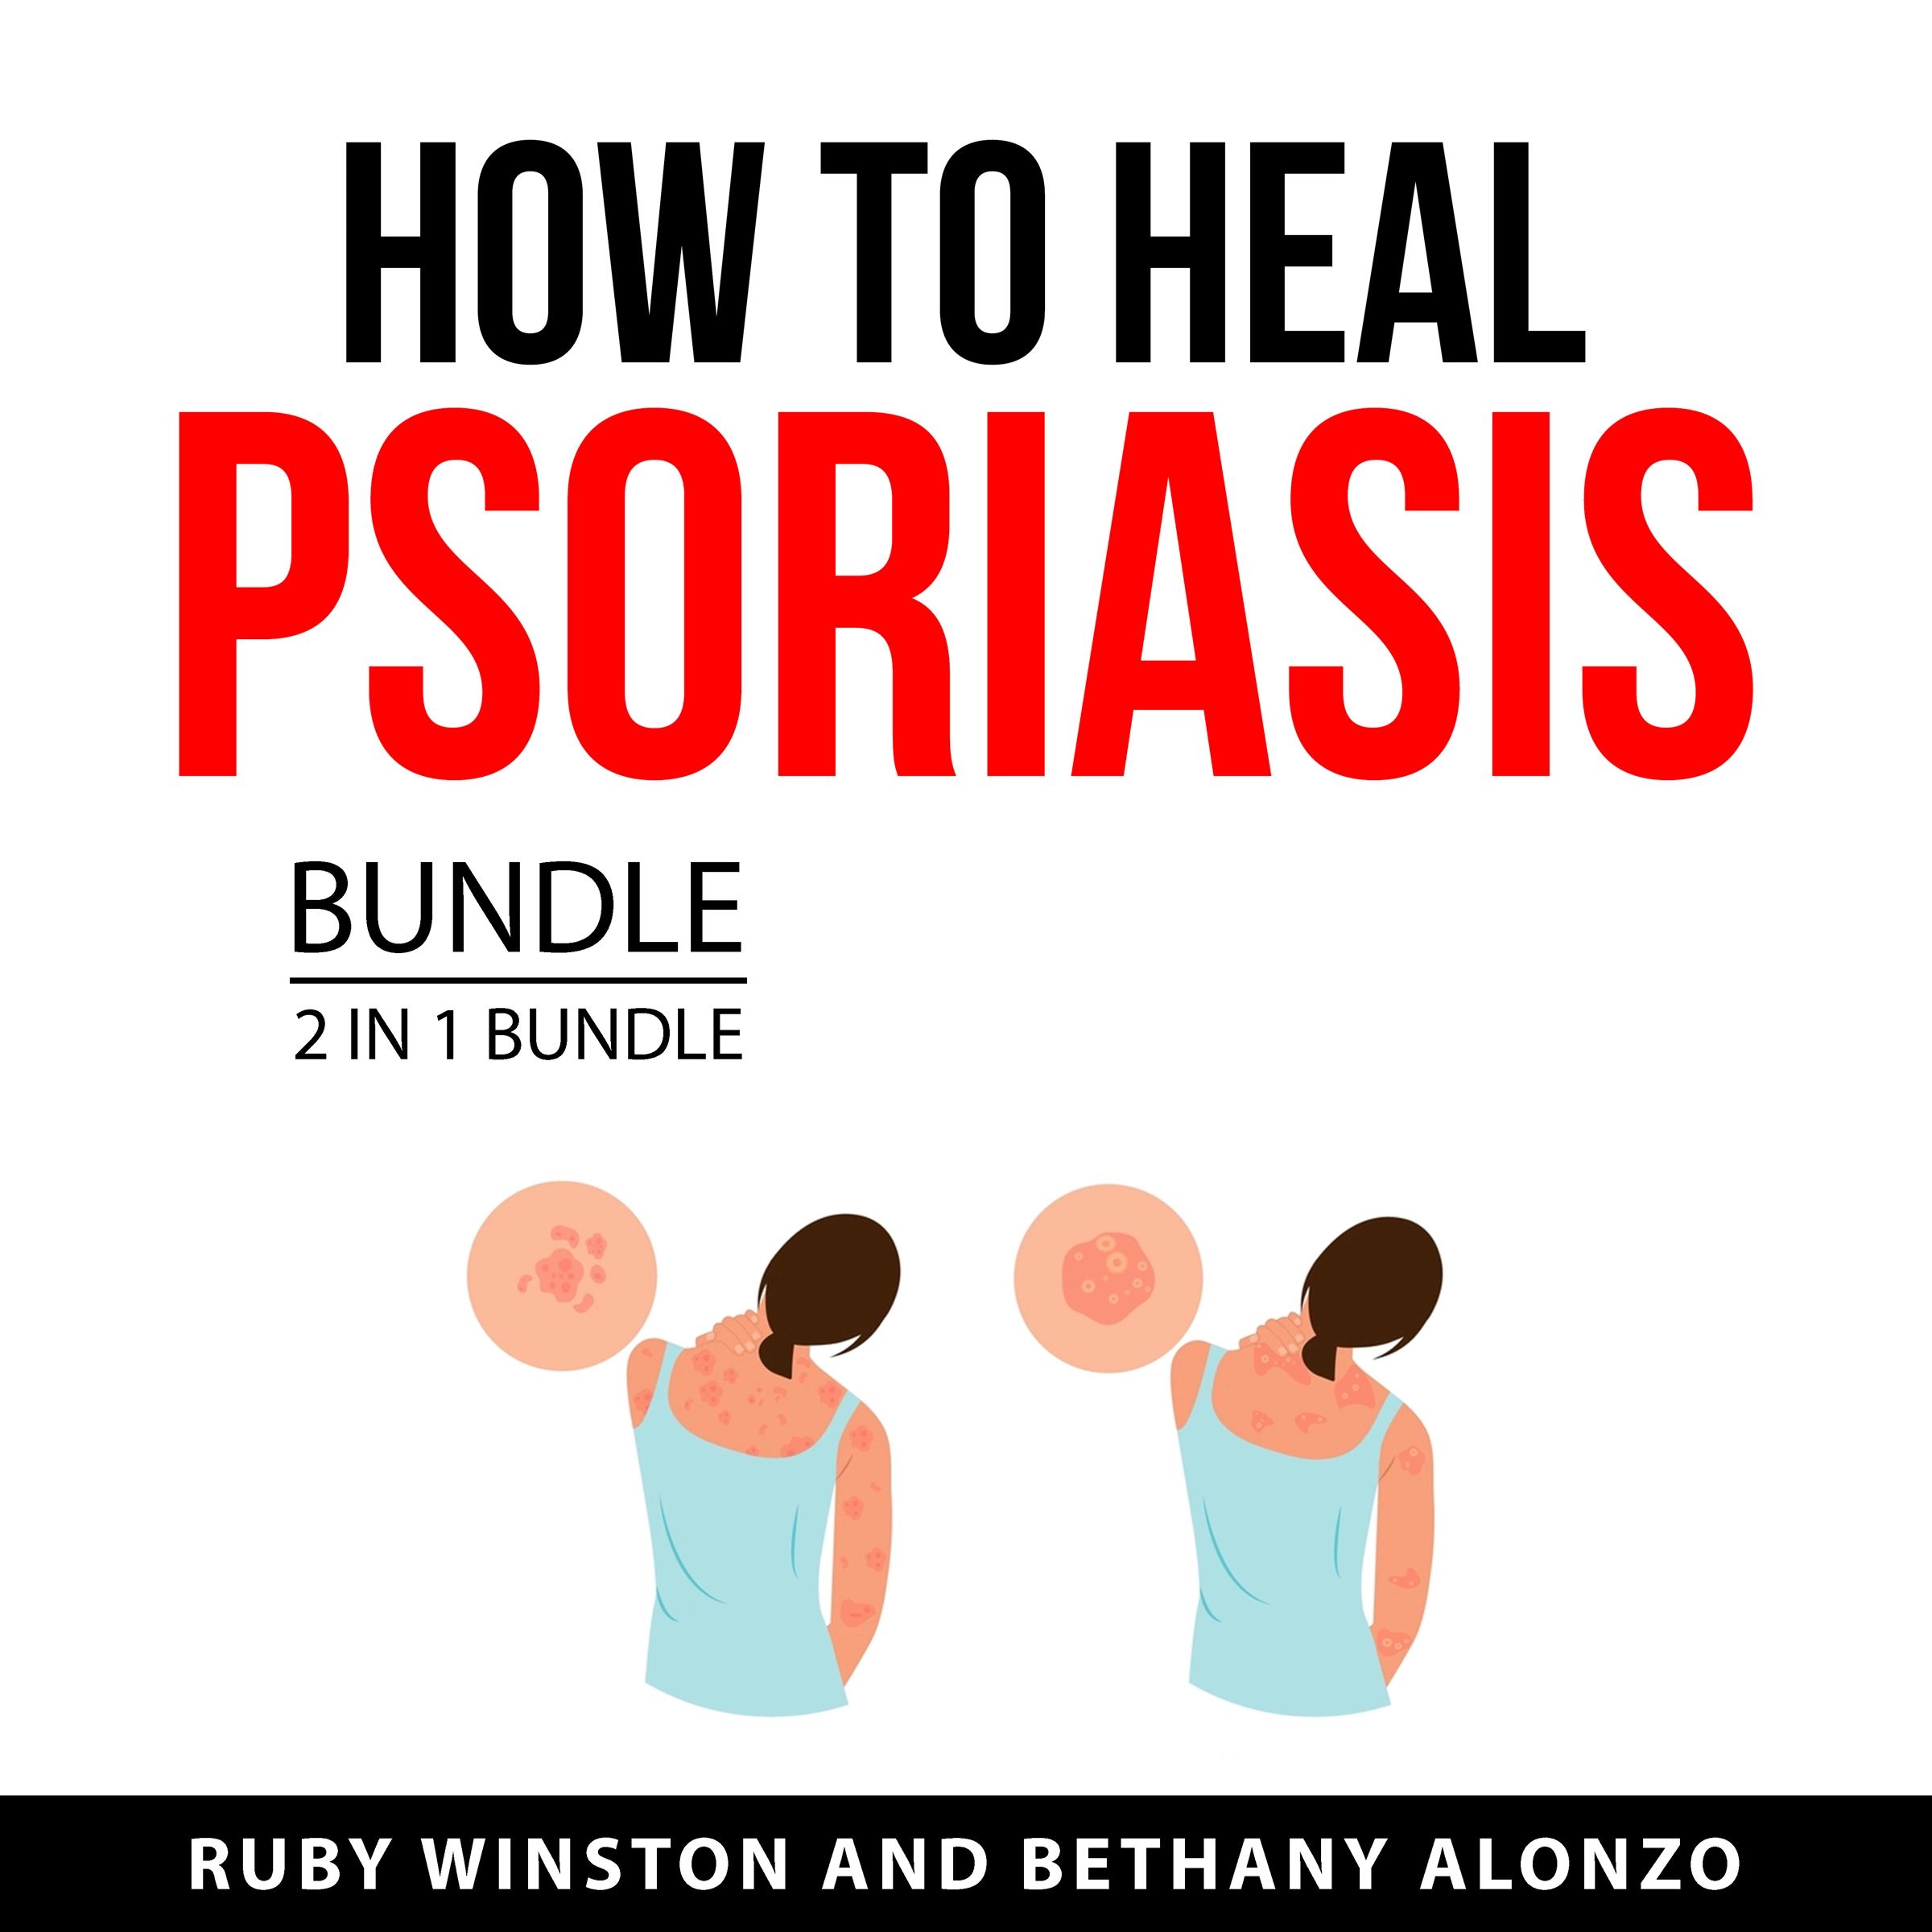 How to Heal Psoriasis Bundle, 2 in 1 Bundle Audiobook by Bethany Alonzo